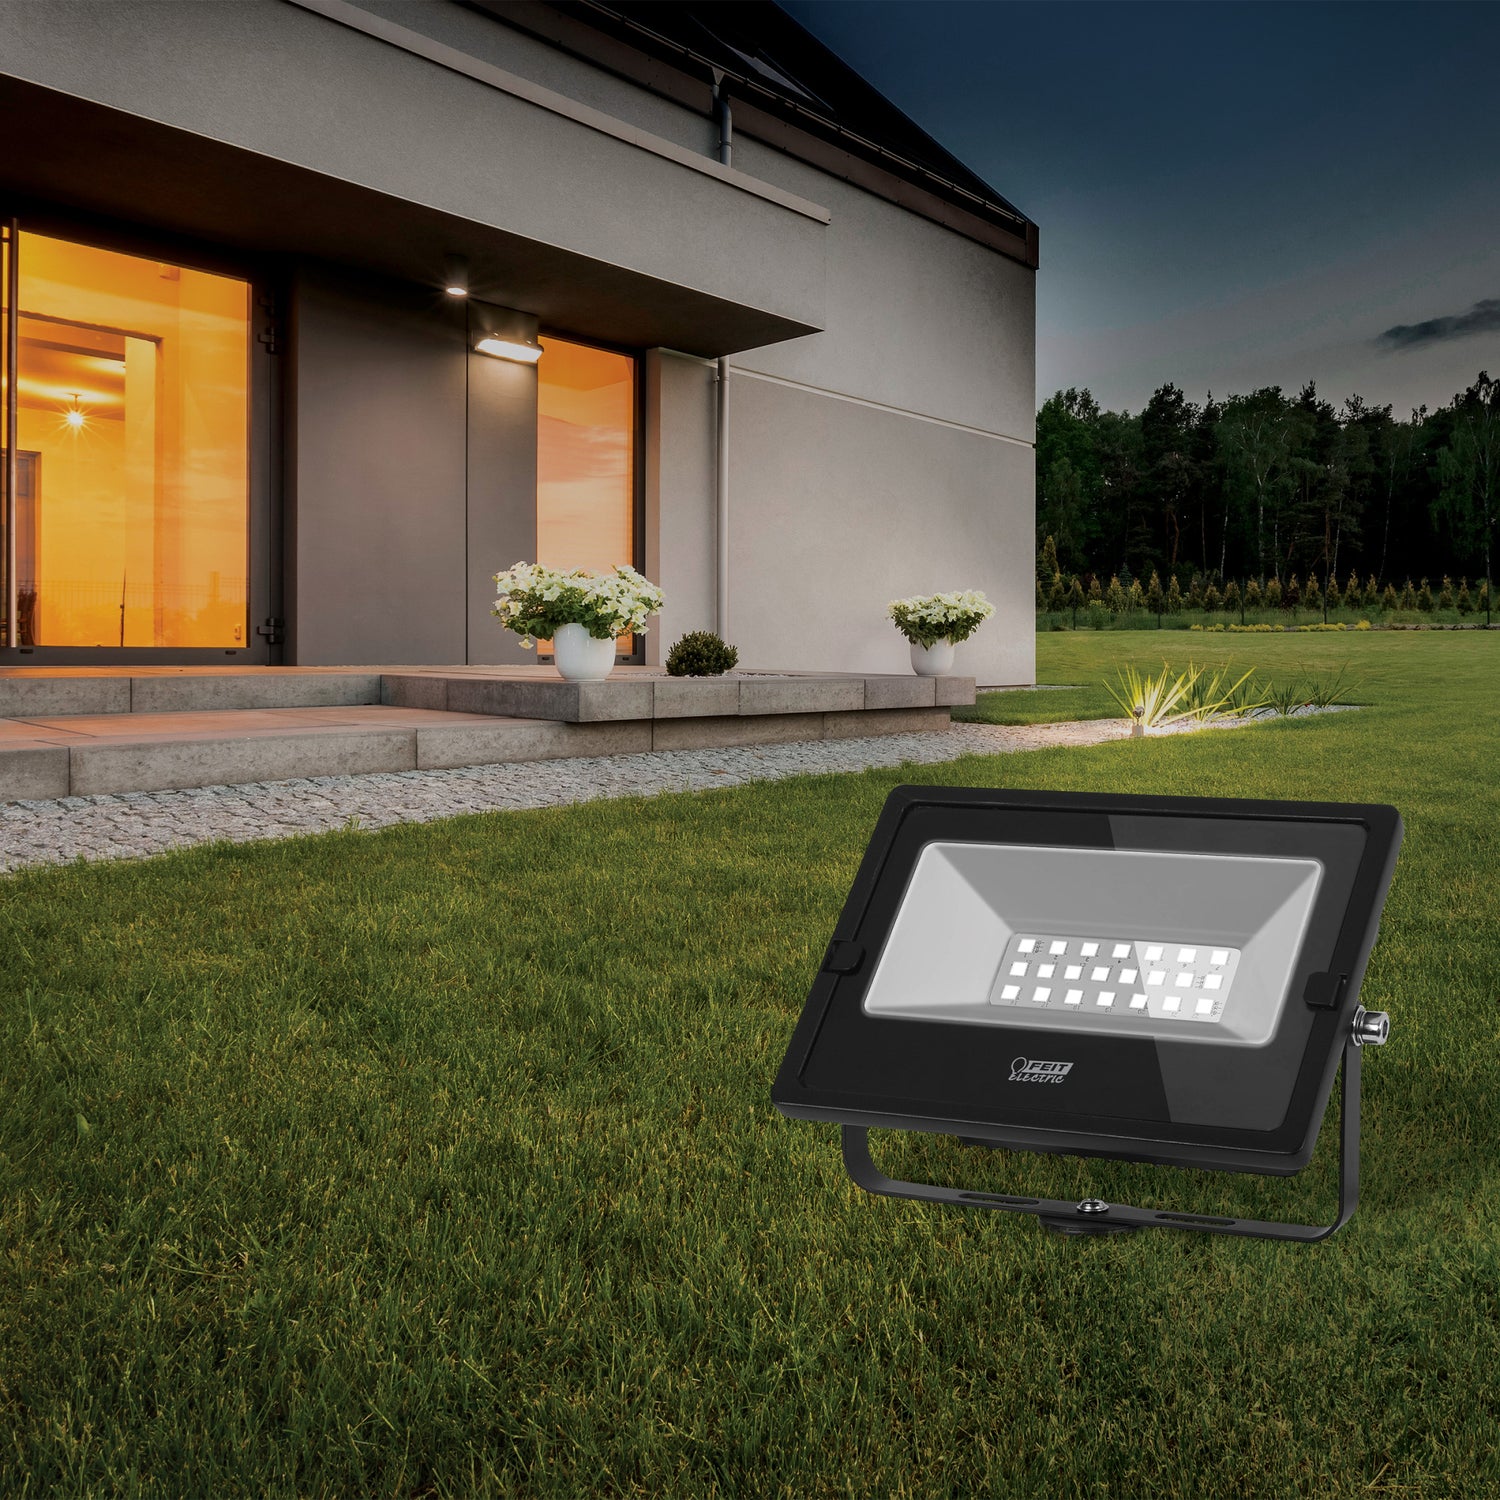 30W RGBW LED Outdoor/Indoor Flood Light Includes 44 Key Remote